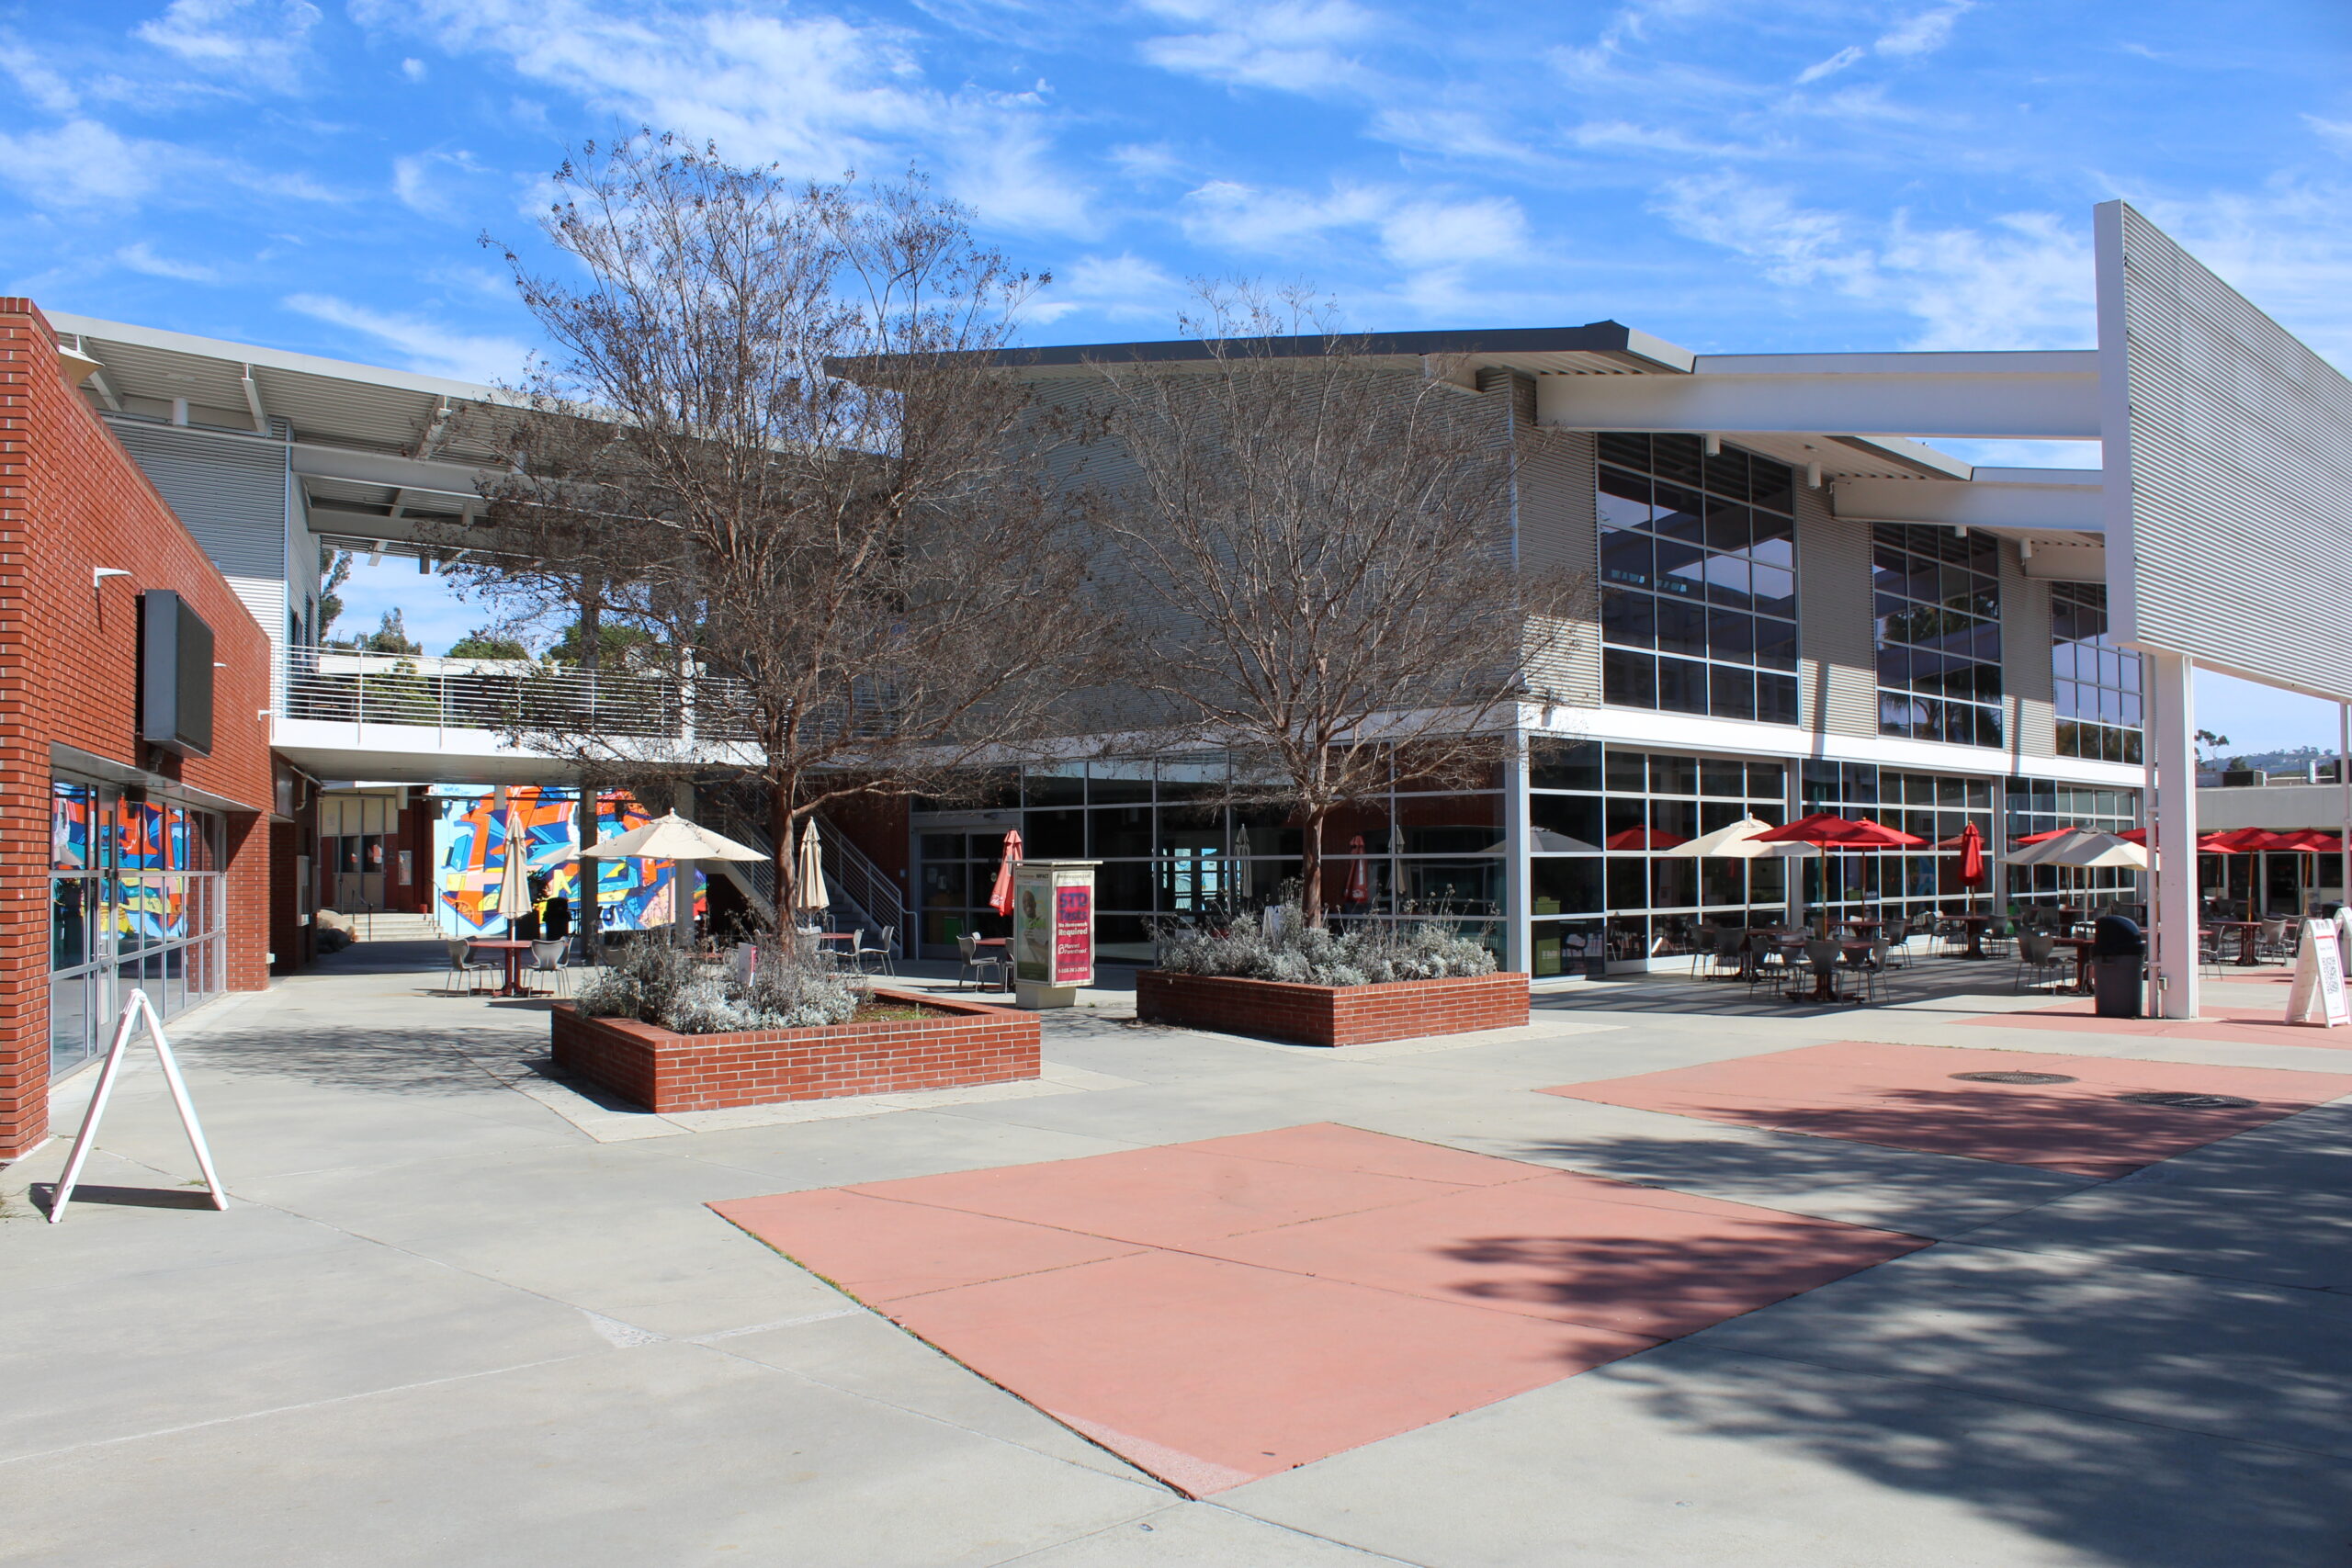 Photo of the Palomar College Student Union, taken from outside at ground level.